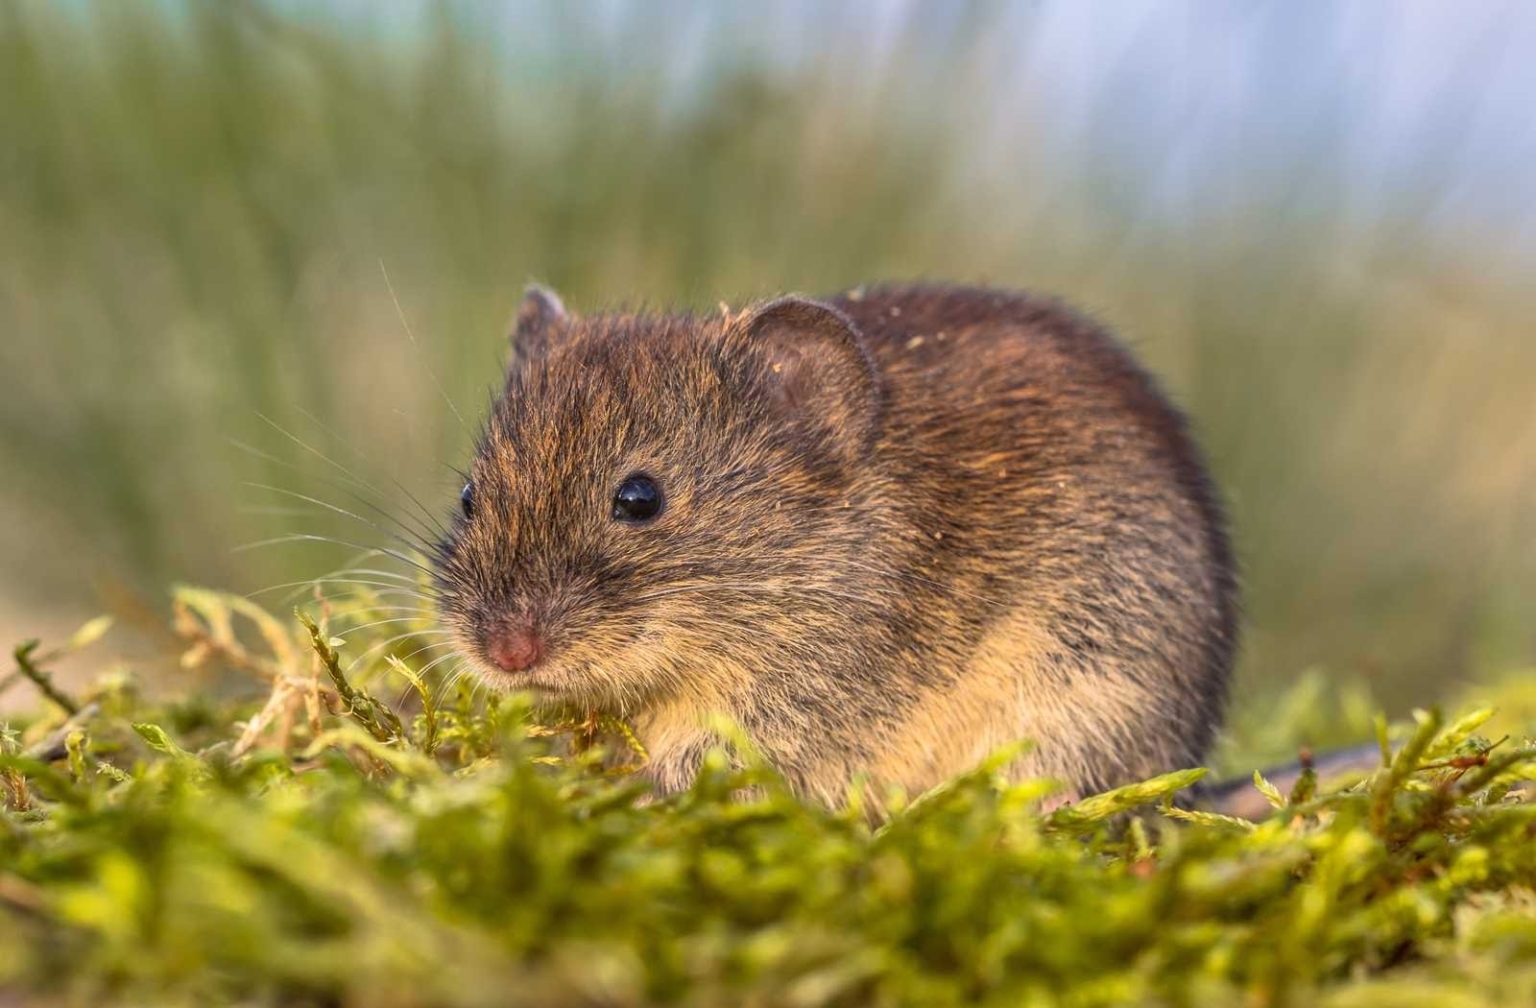 Closeup of a mouse in a field